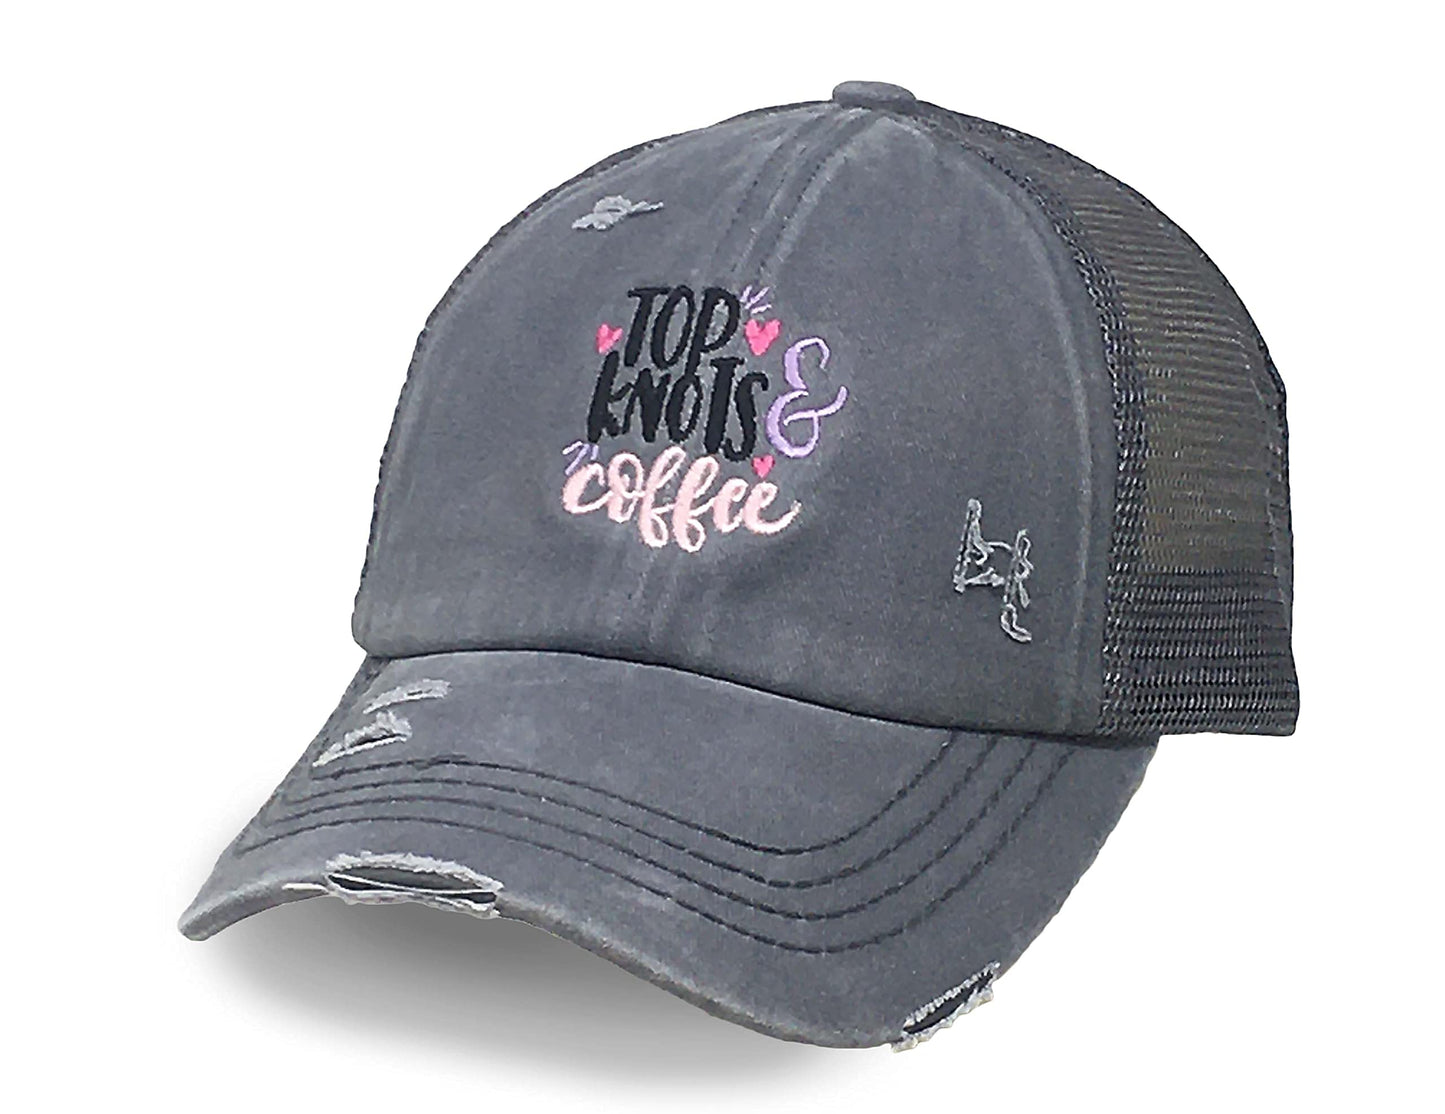 Top Knots and Coffee Criss Cross Ponytail Hat by Funky Junque